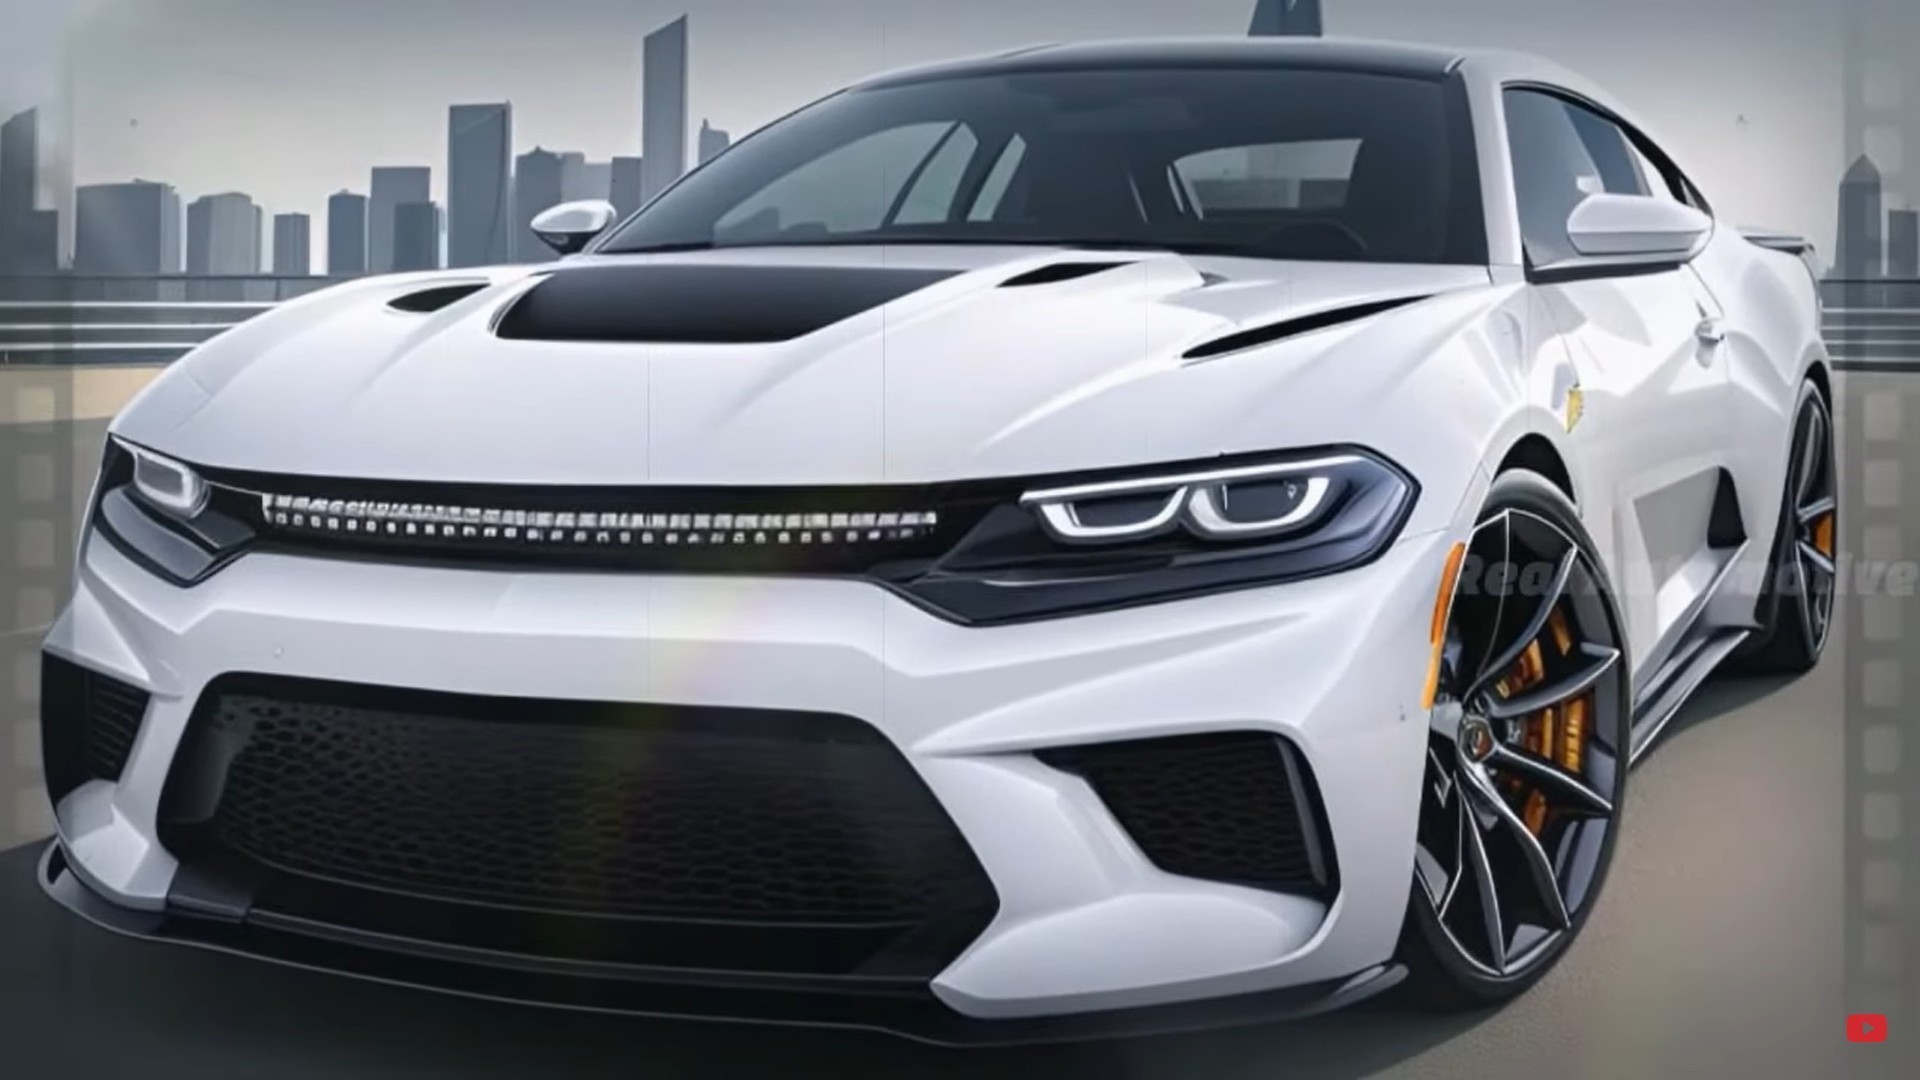 2025 Dodge Charger Everything We Know About the AllNew Muscle Car